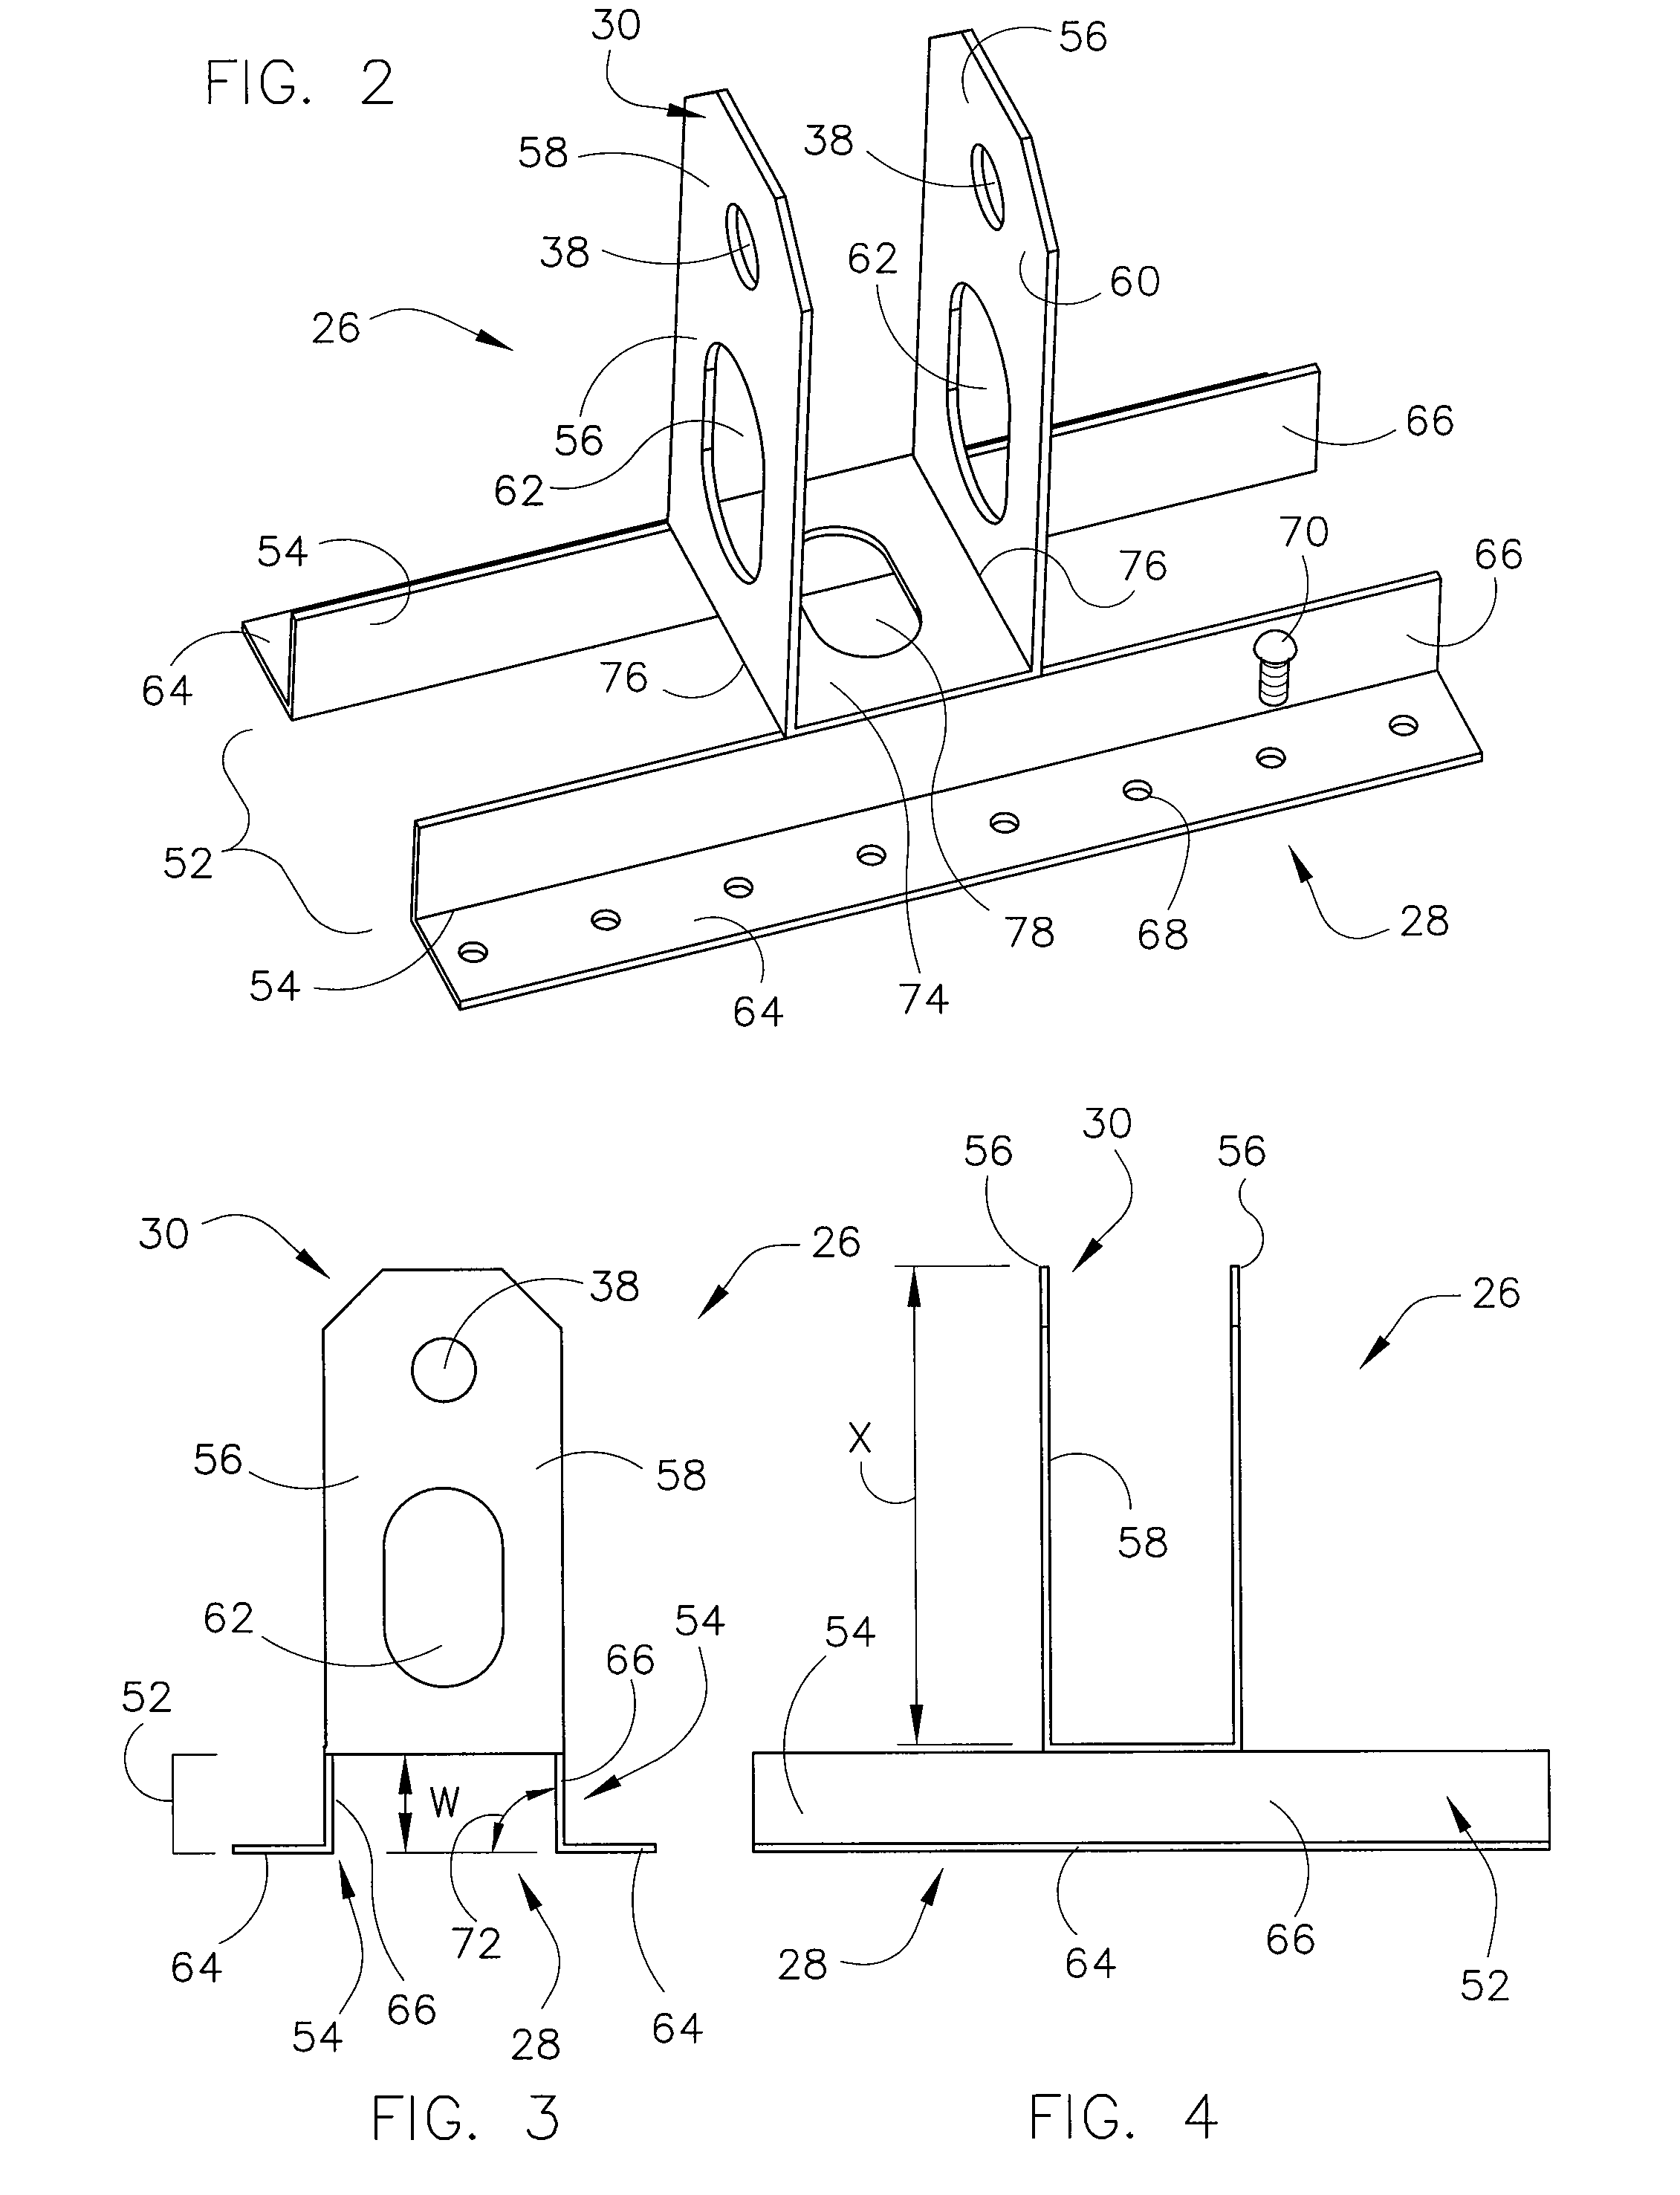 Load bearing wall formwork system and method